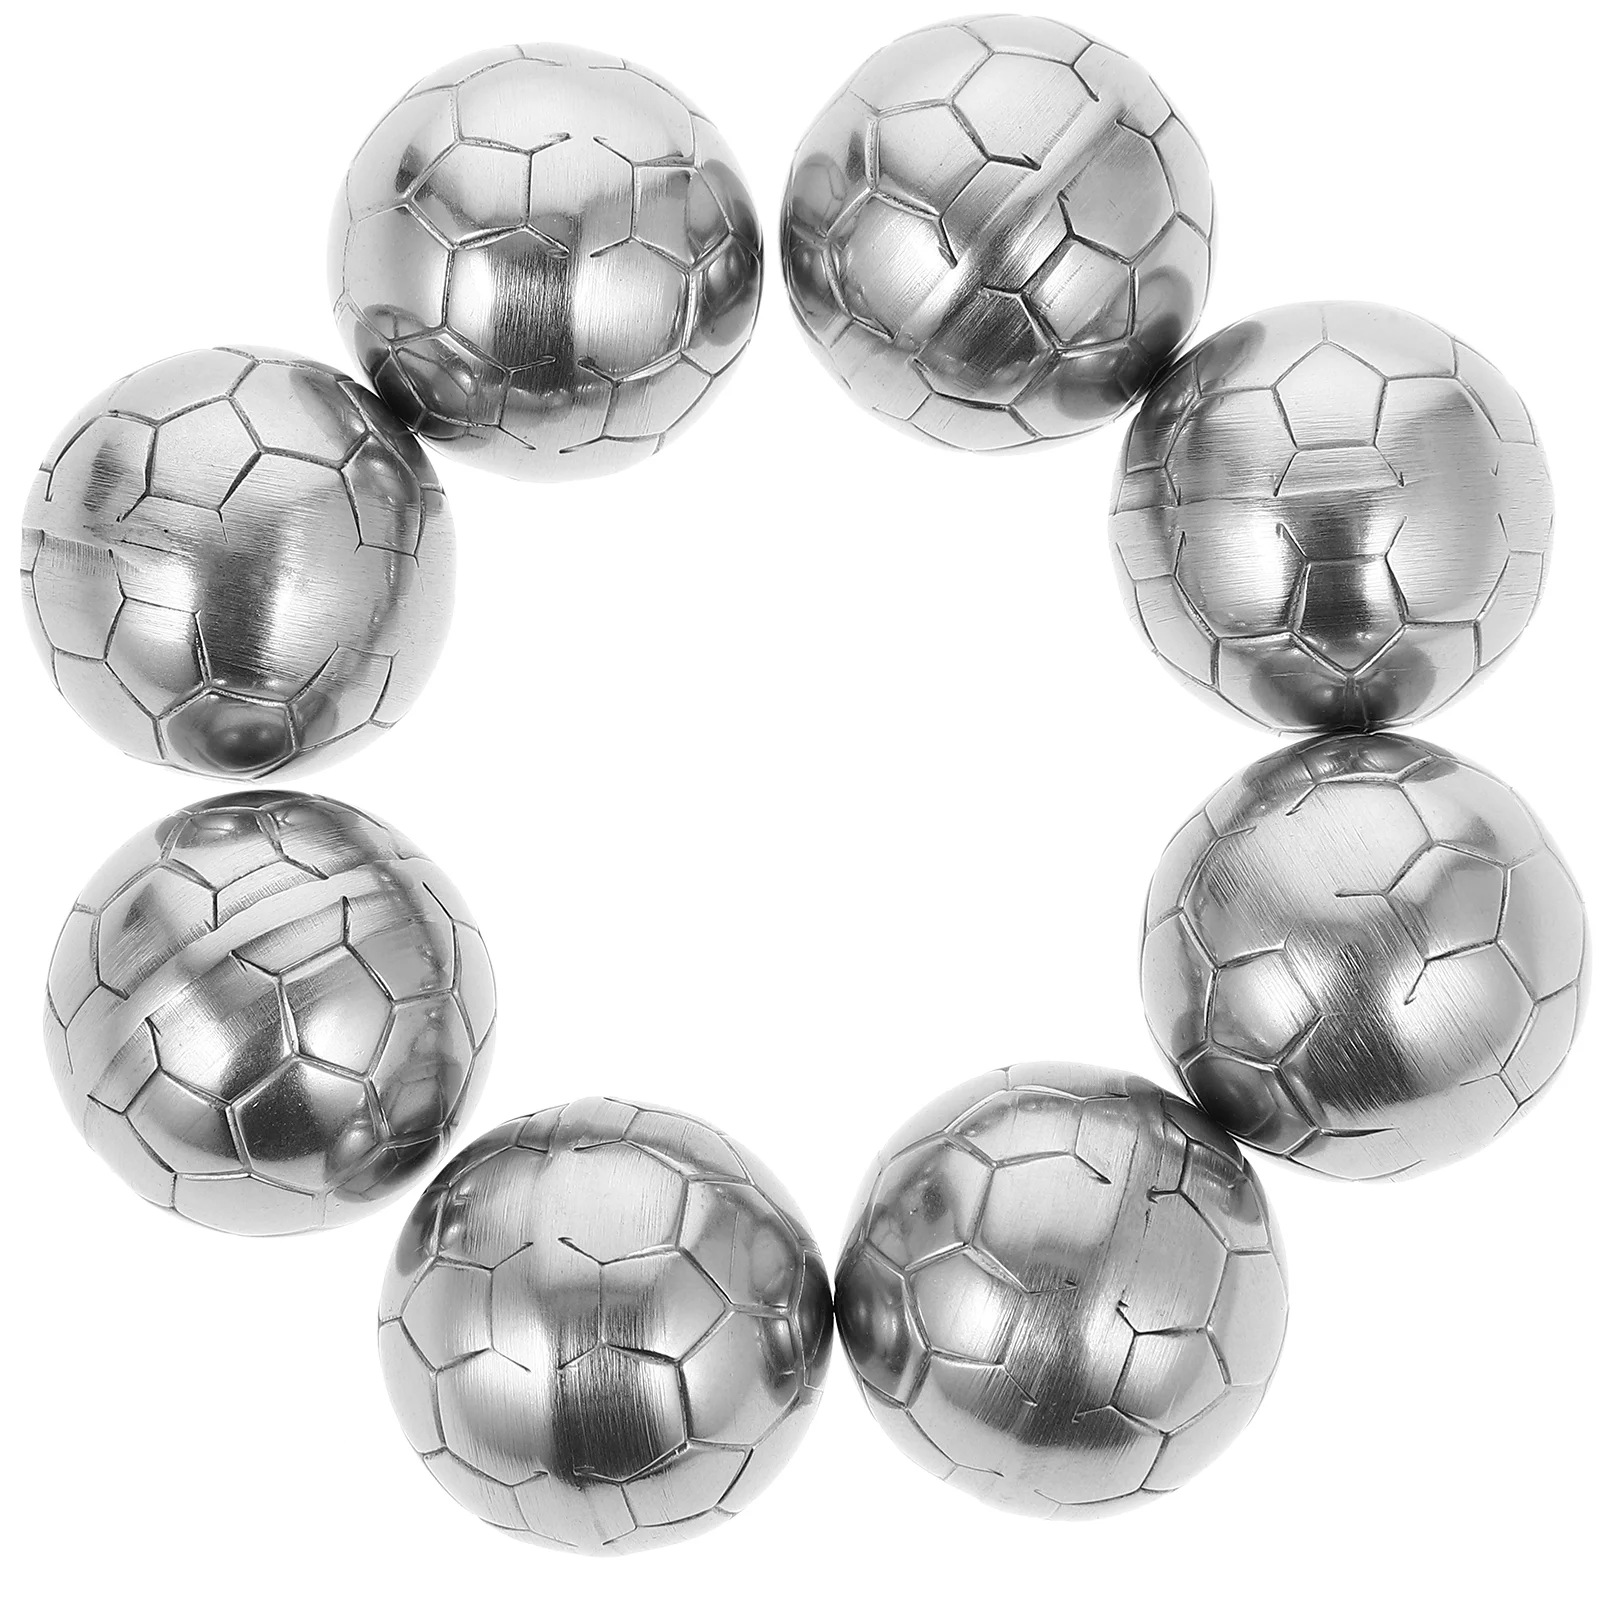 

8 Pcs Metal Ice Cubes Chilling Stones Beverage Rocks Stainless Steel Cocktail Accessories Drinks Ball Whiskey Puck